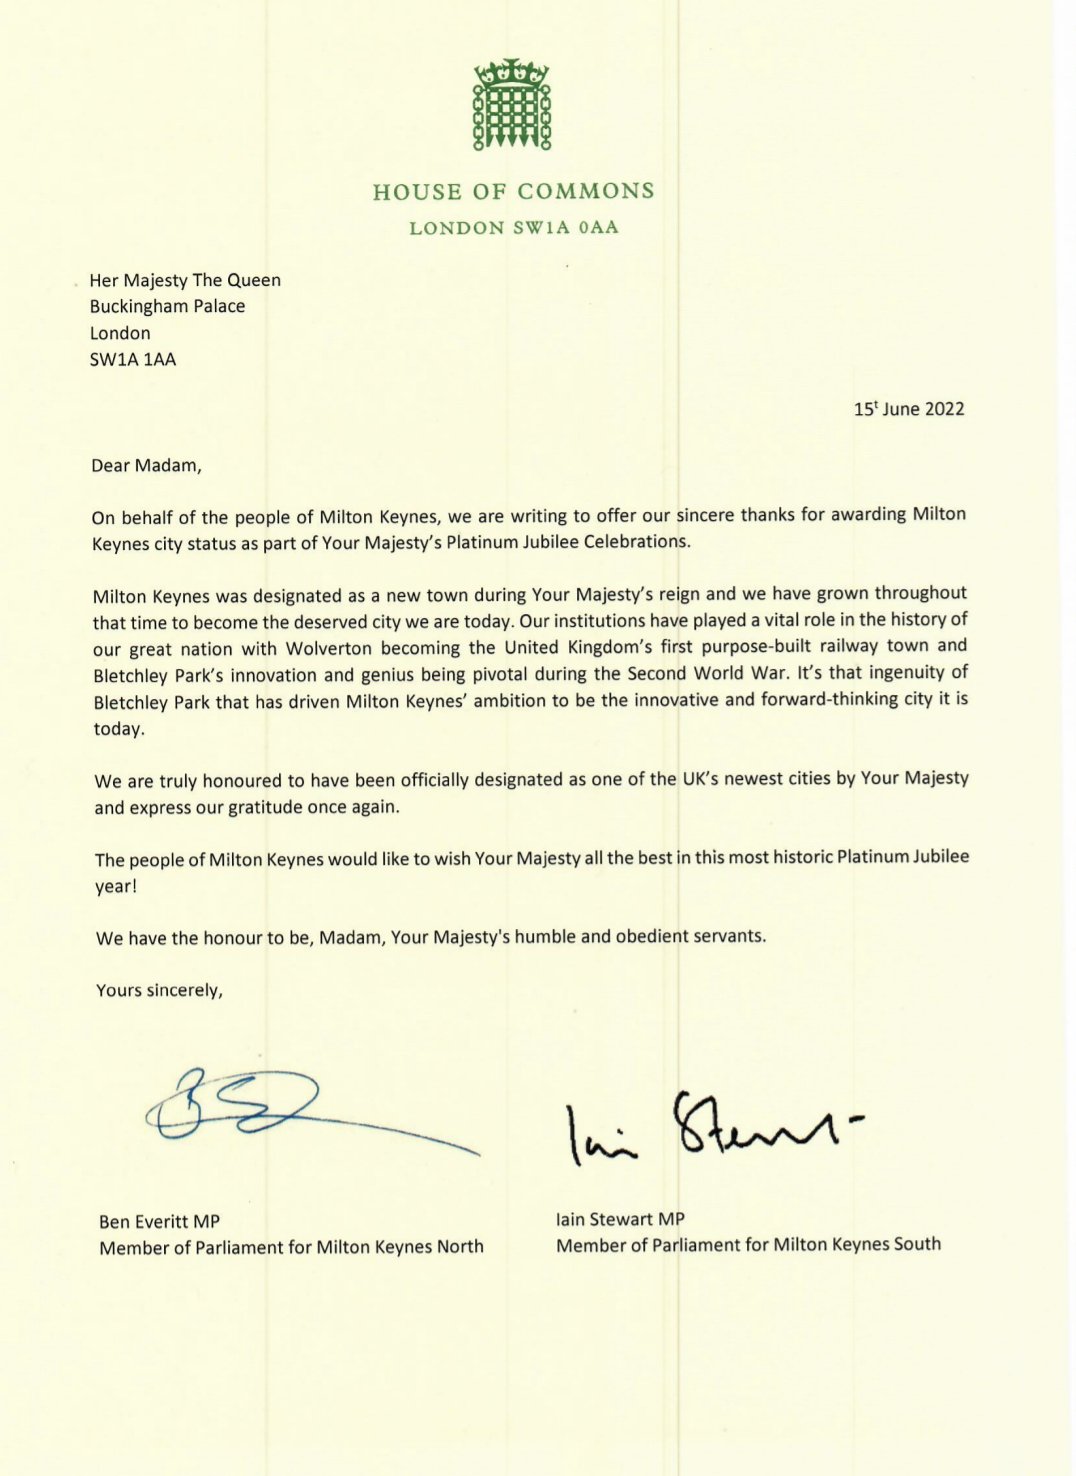 MPs letter to the Queen